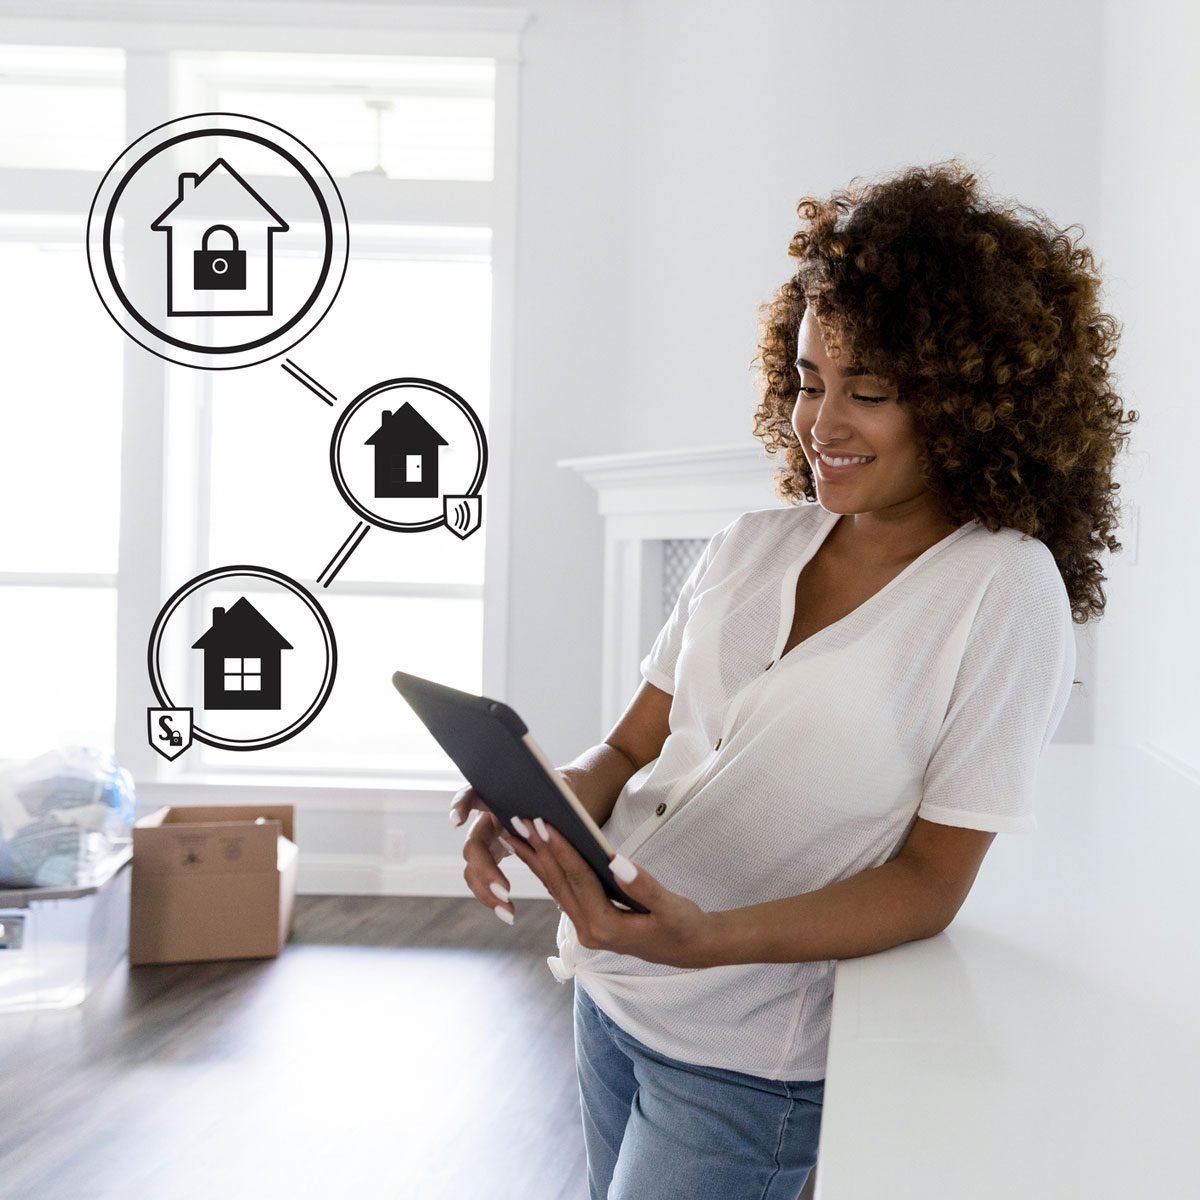 Should You Get a Smart Home Security System?